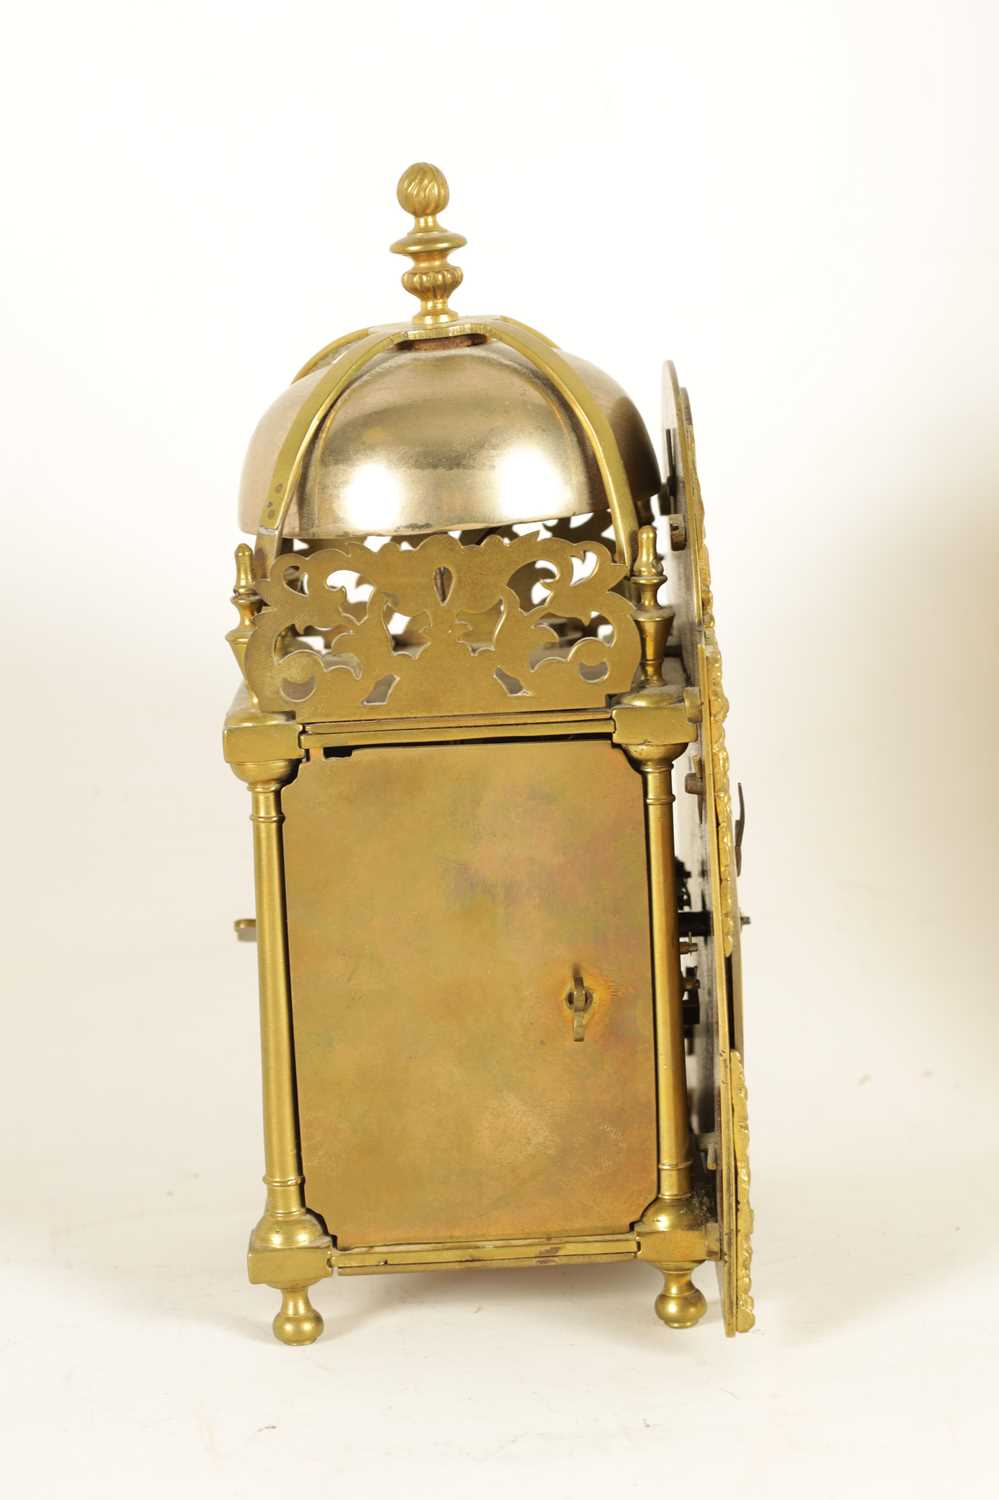 AN 18TH CENTURY BRASS LANTERN CLOCK WITH LATER MOVEMENT - Image 4 of 9